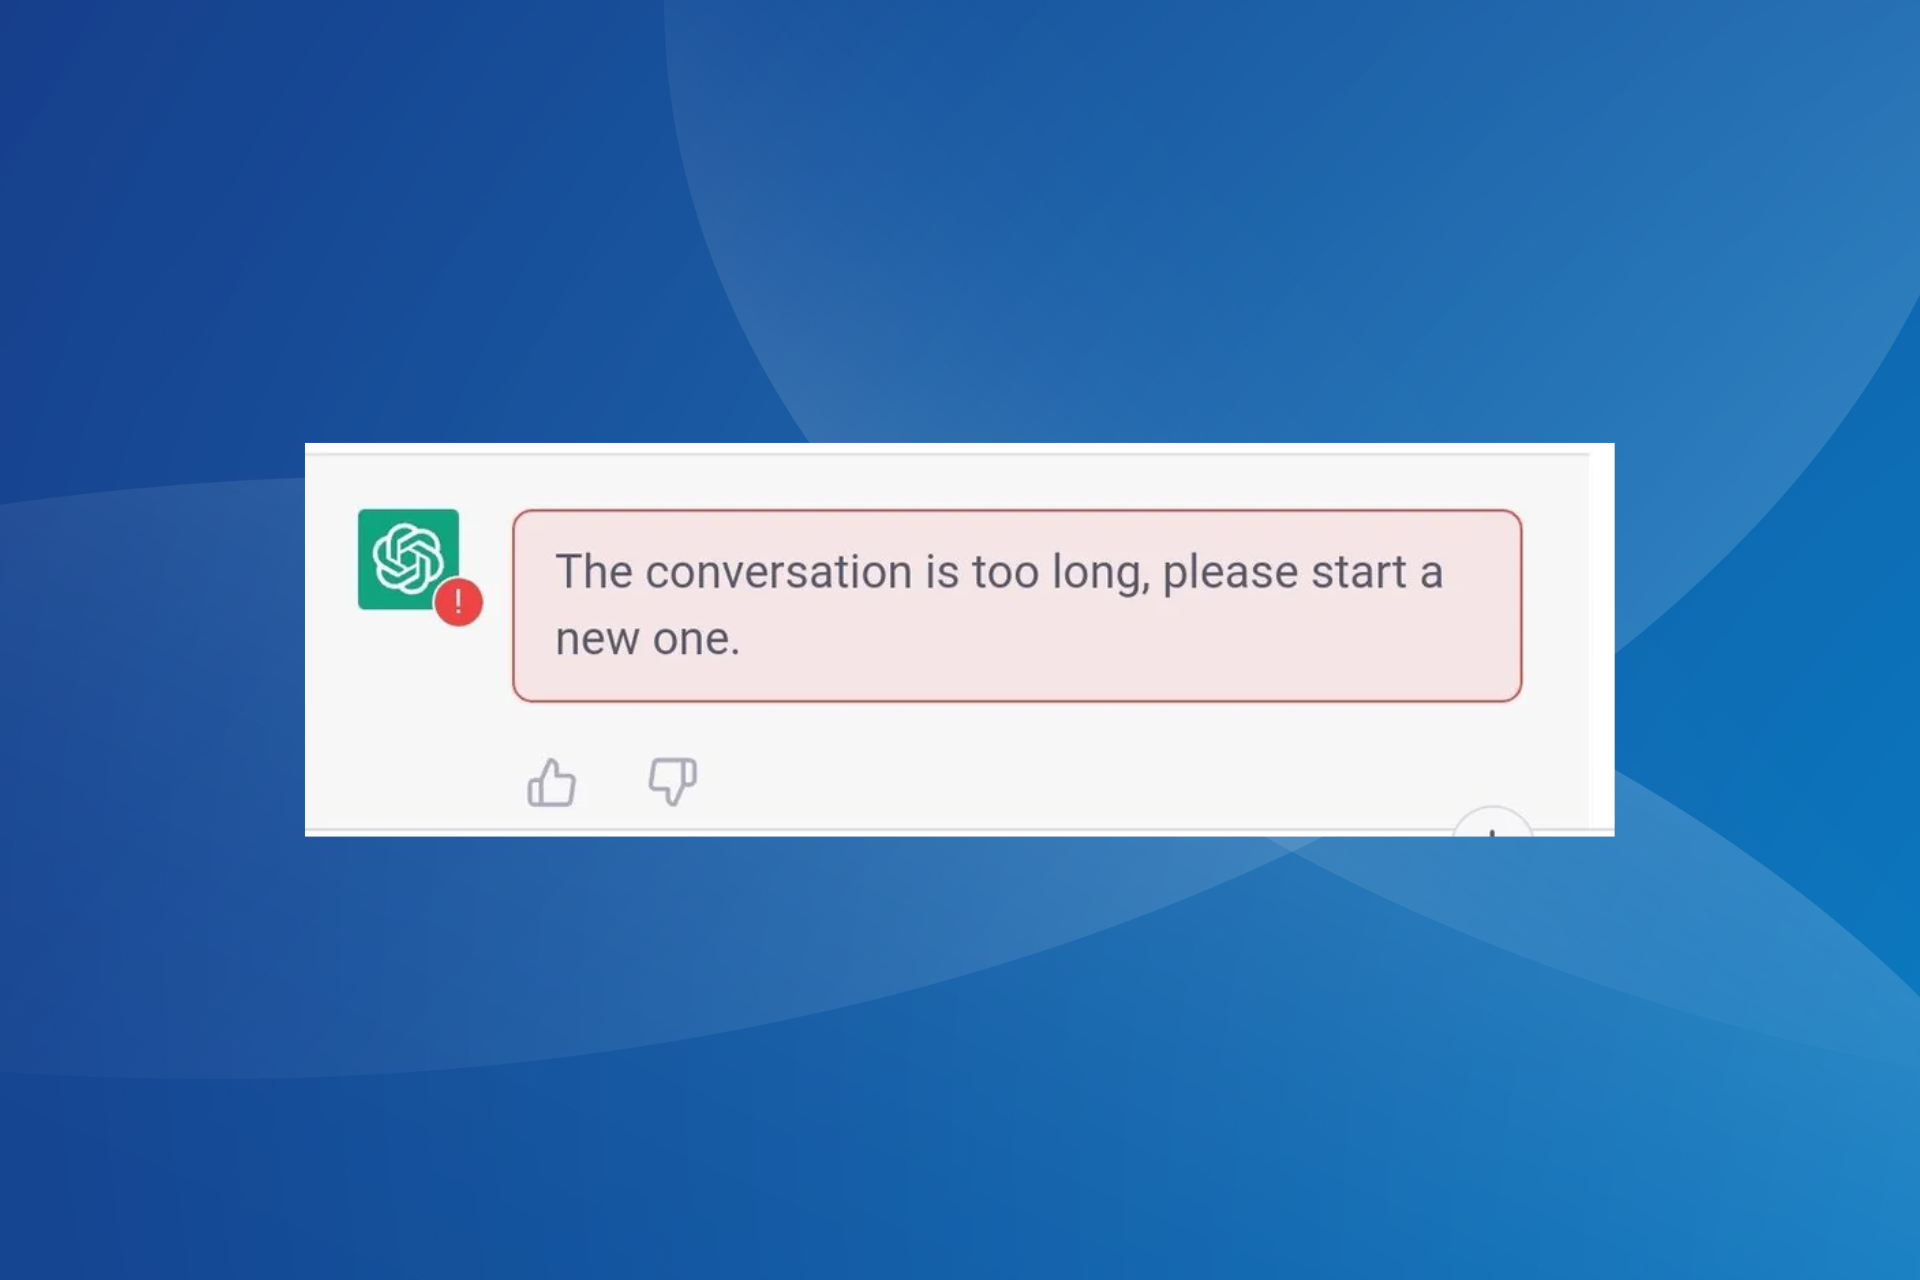 Fix the chatgpt the conversation is too long error